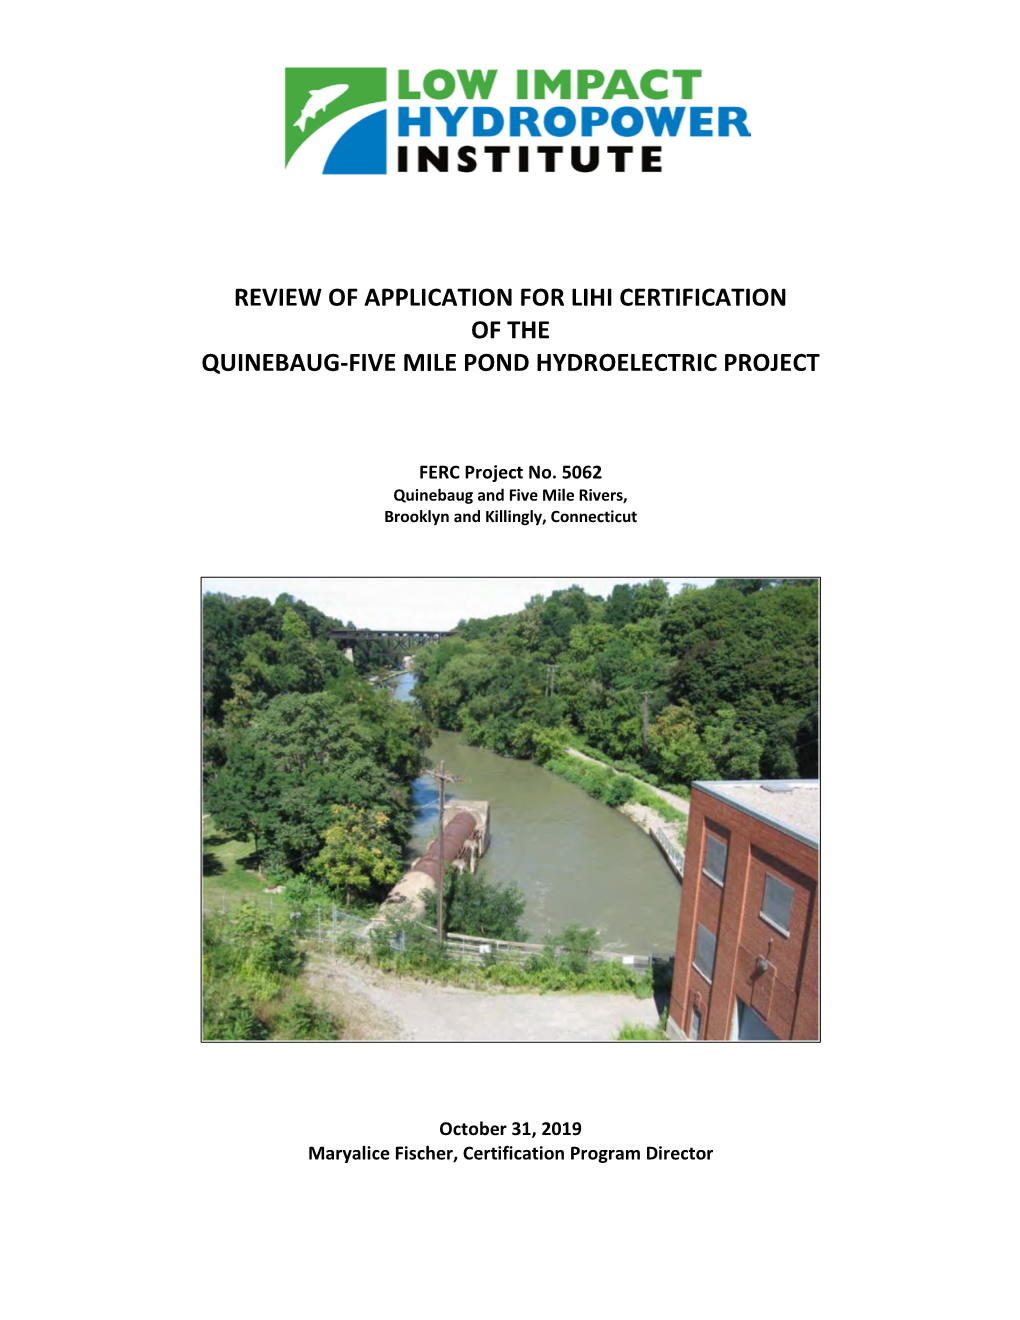 Review of Application for Lihi Certification of the Quinebaug-Five Mile Pond Hydroelectric Project